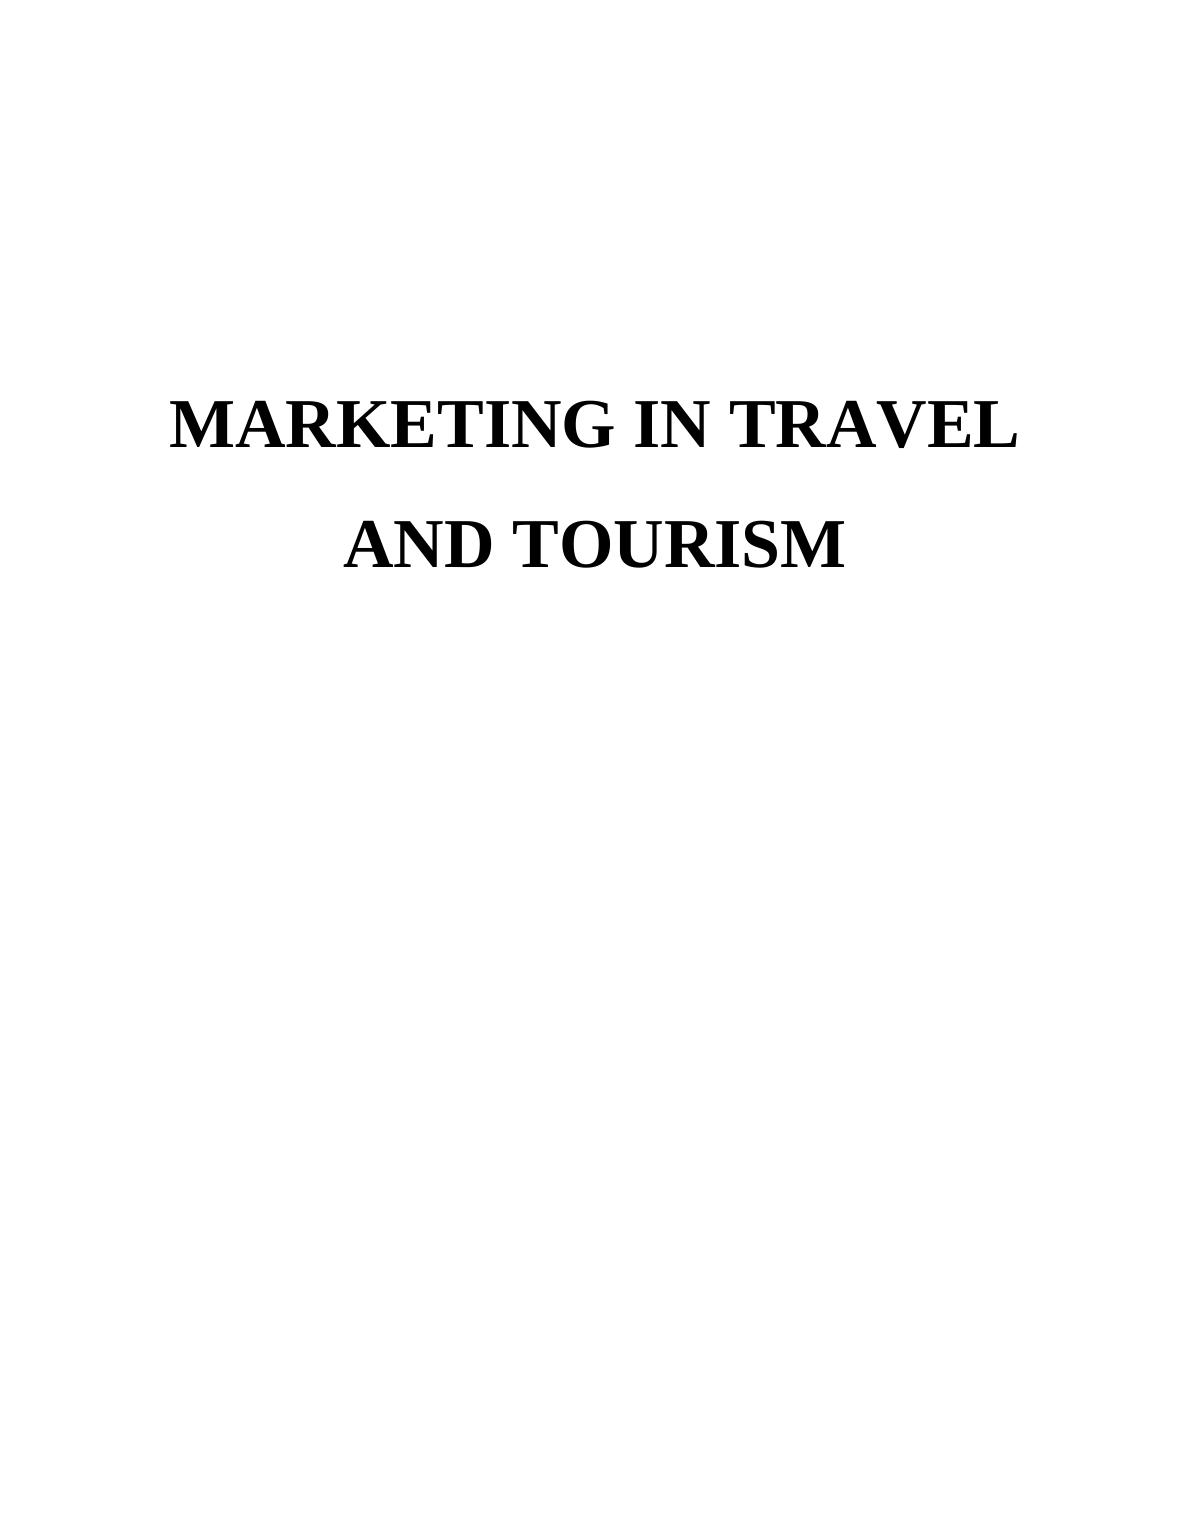 Core Concepts of Marketing in Travel & Tourism_1